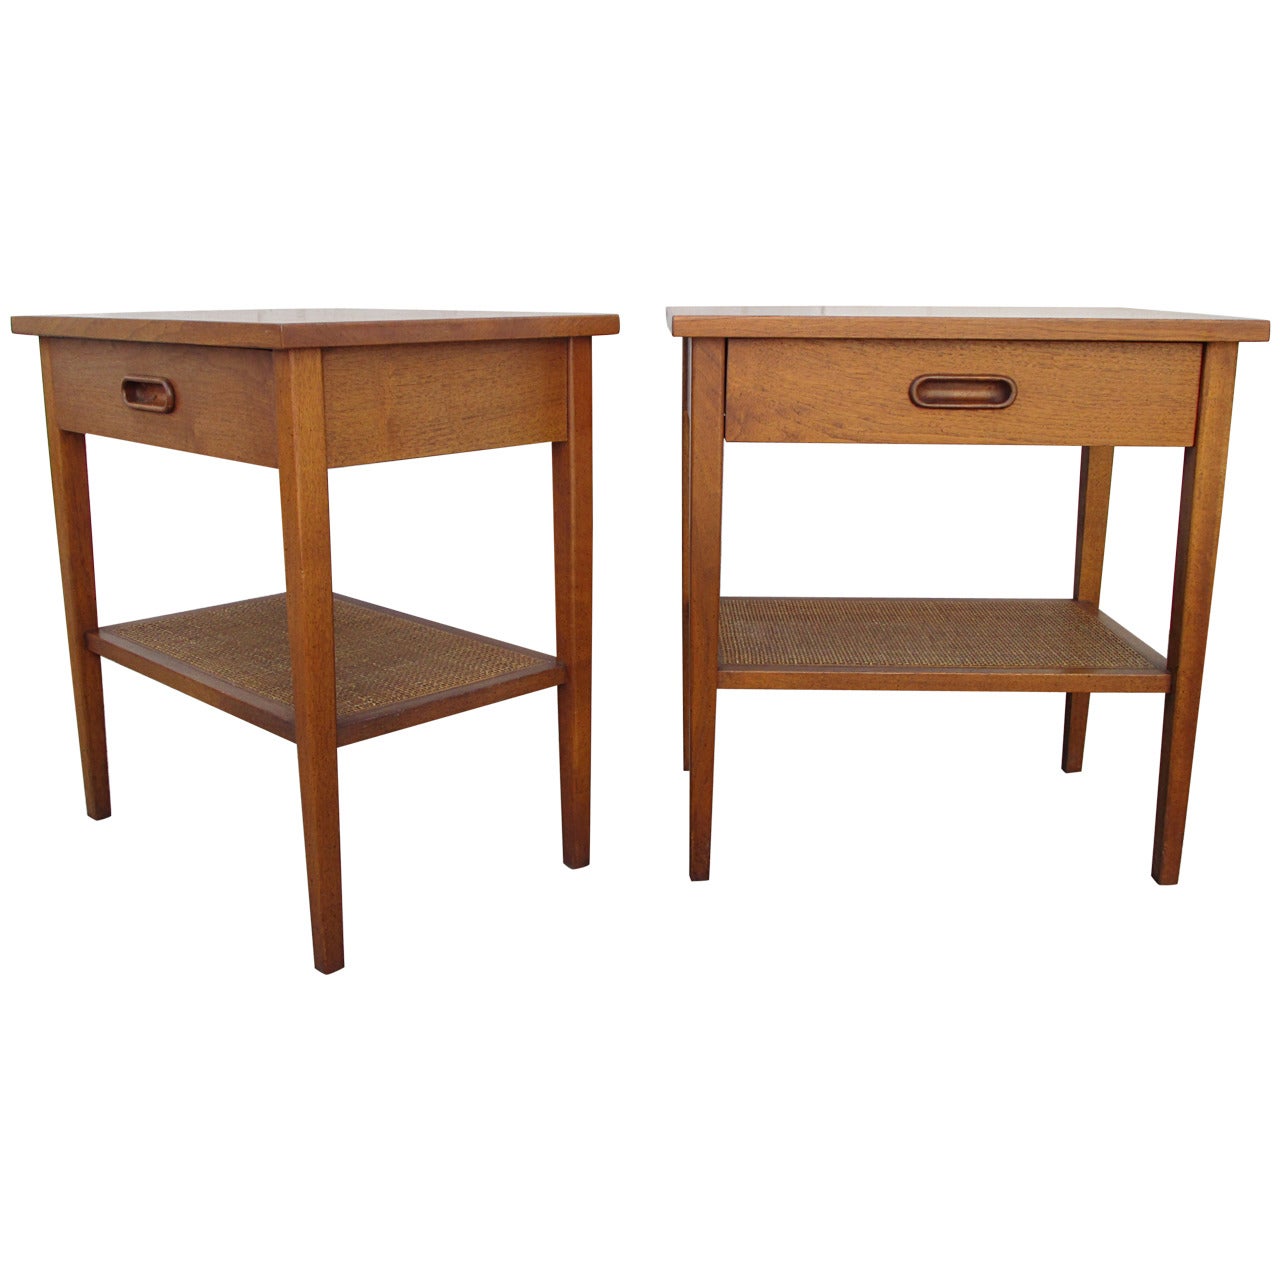 Pair of Walnut and Cane Side Tables